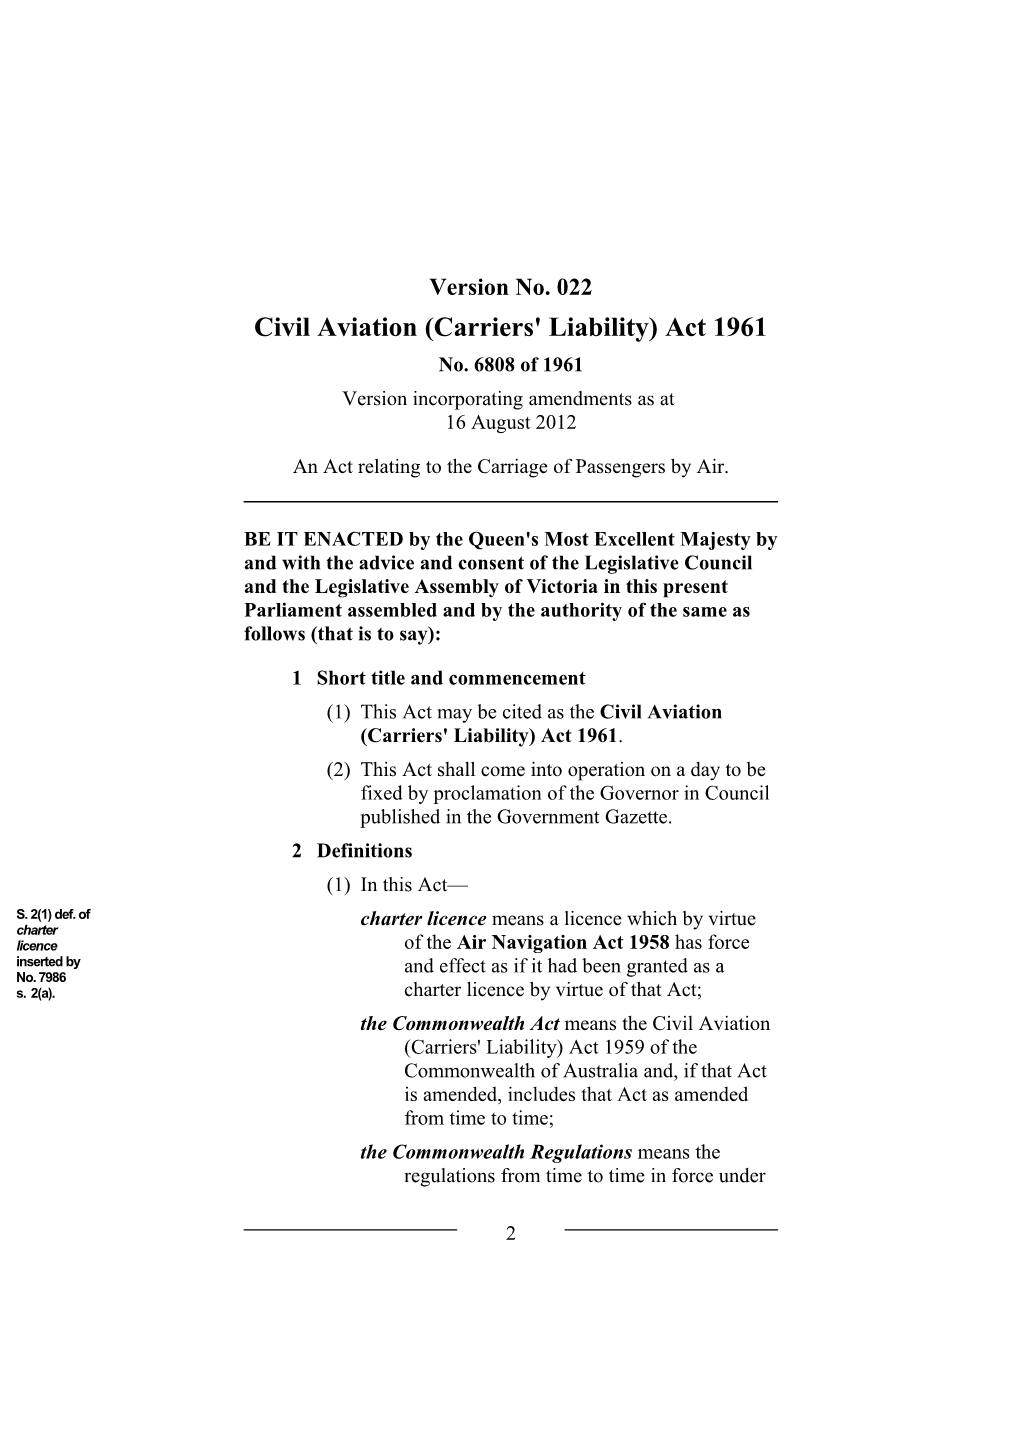 Civil Aviation (Carriers' Liability) Act 1961